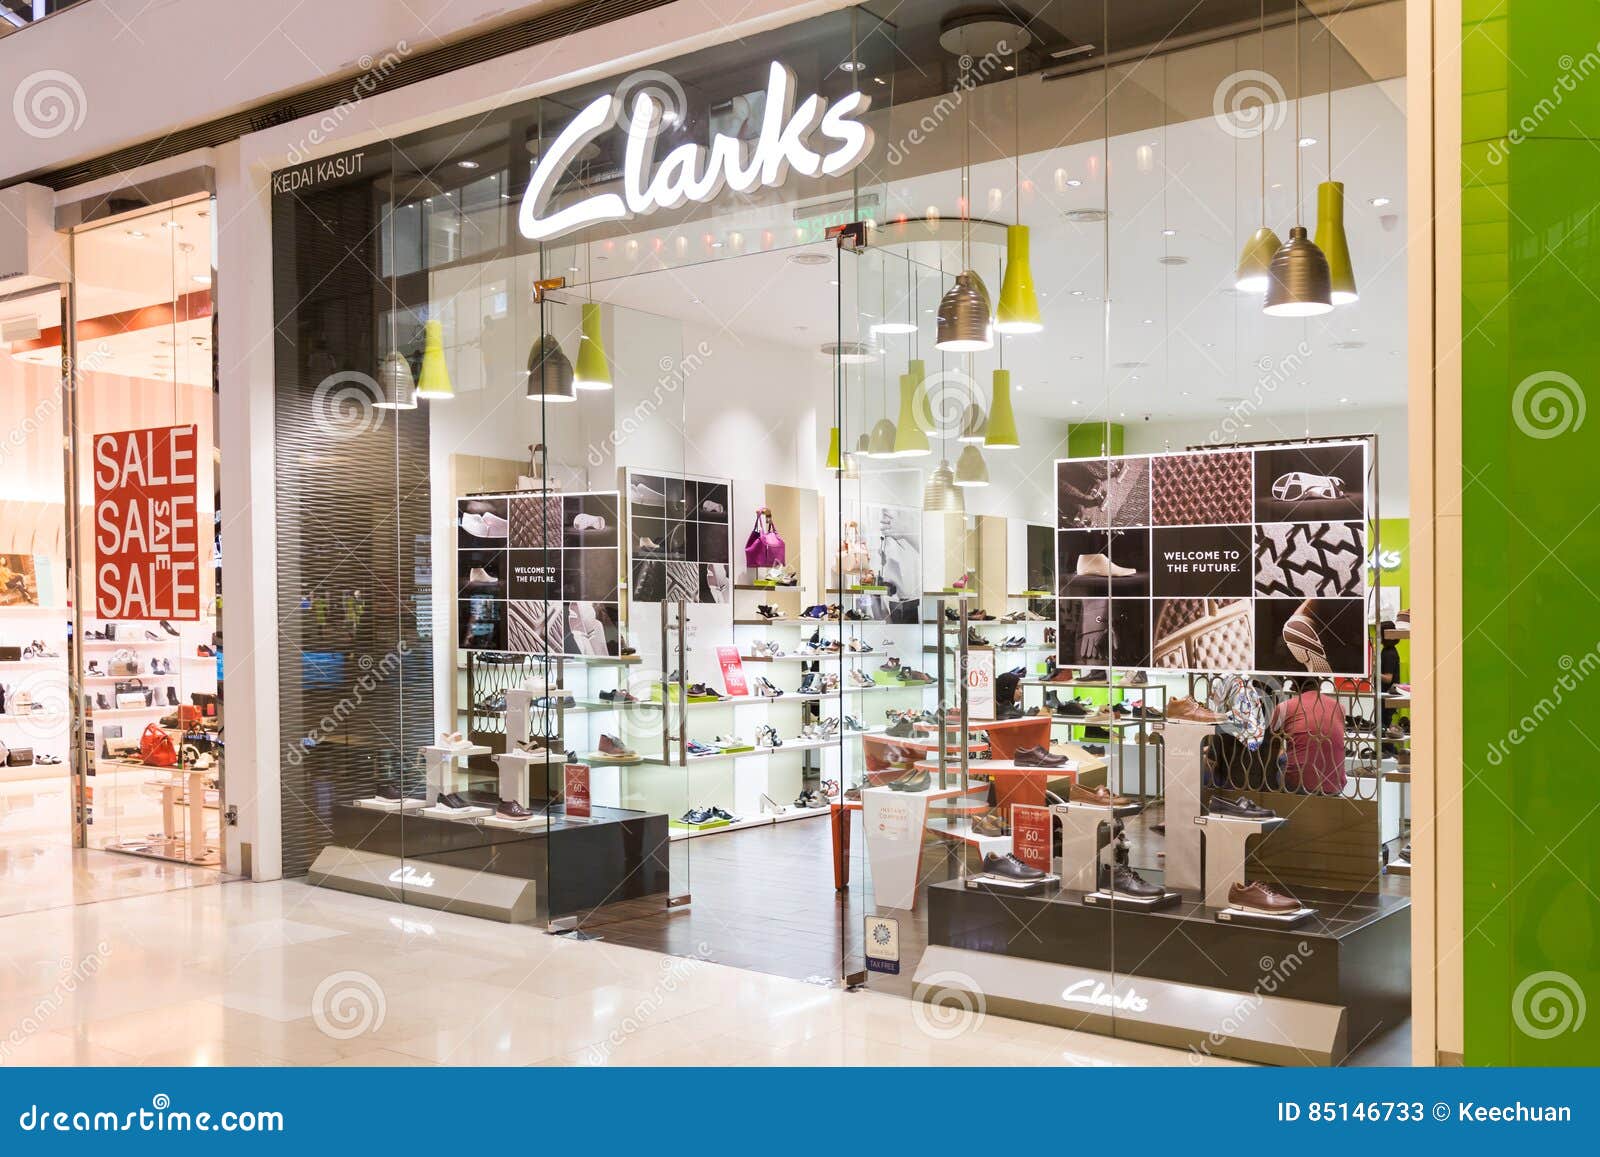 clarks kuala lumpur off 67% - online-sms.in